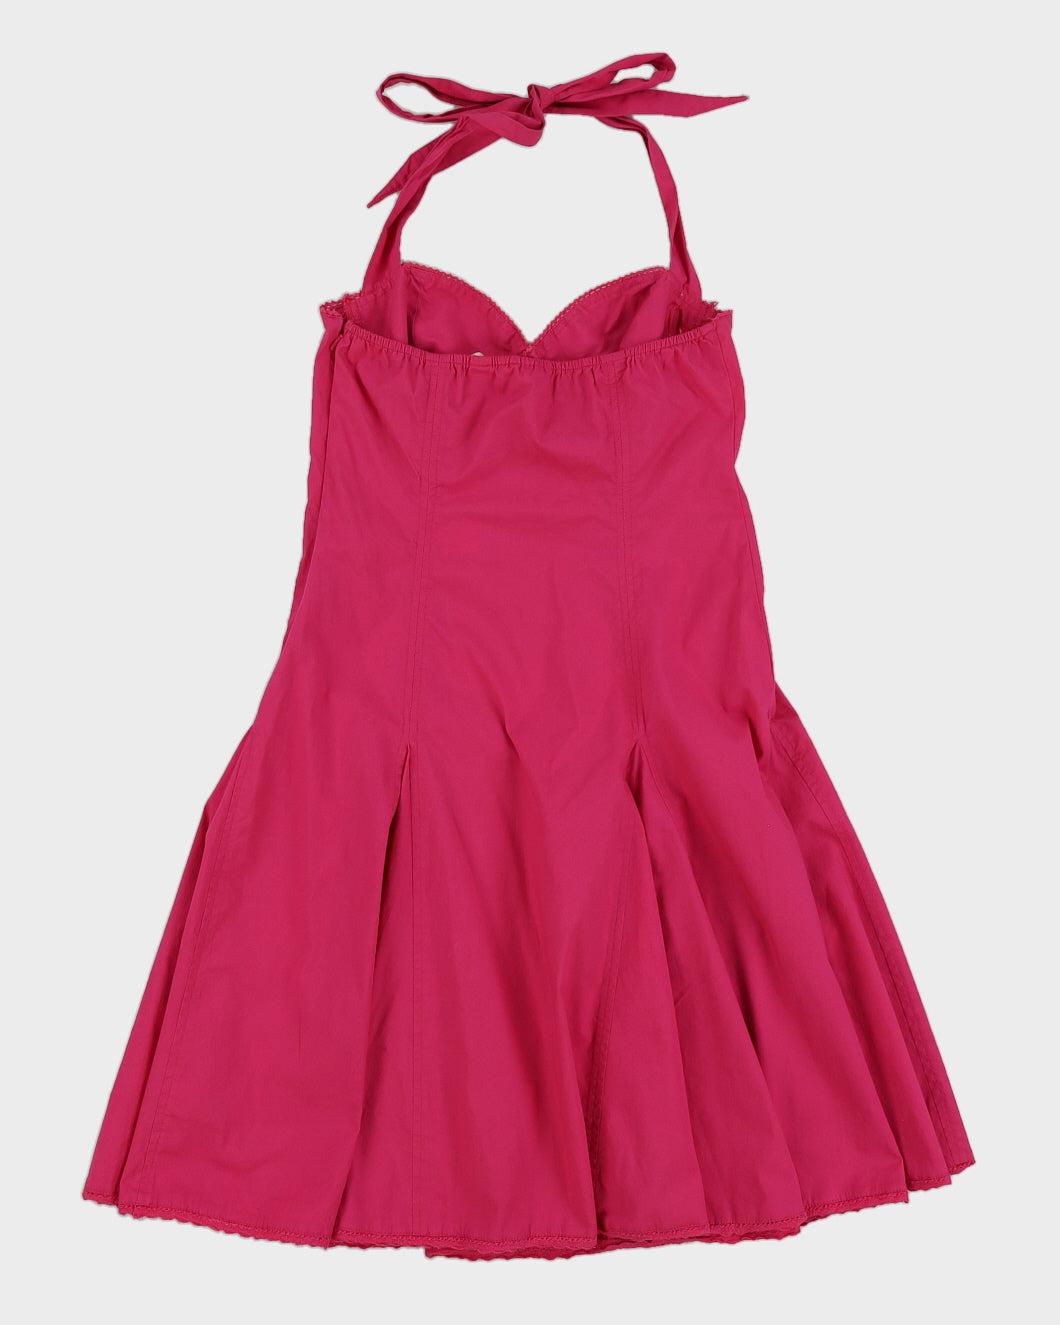 Y2K Pink Guess Dress - S